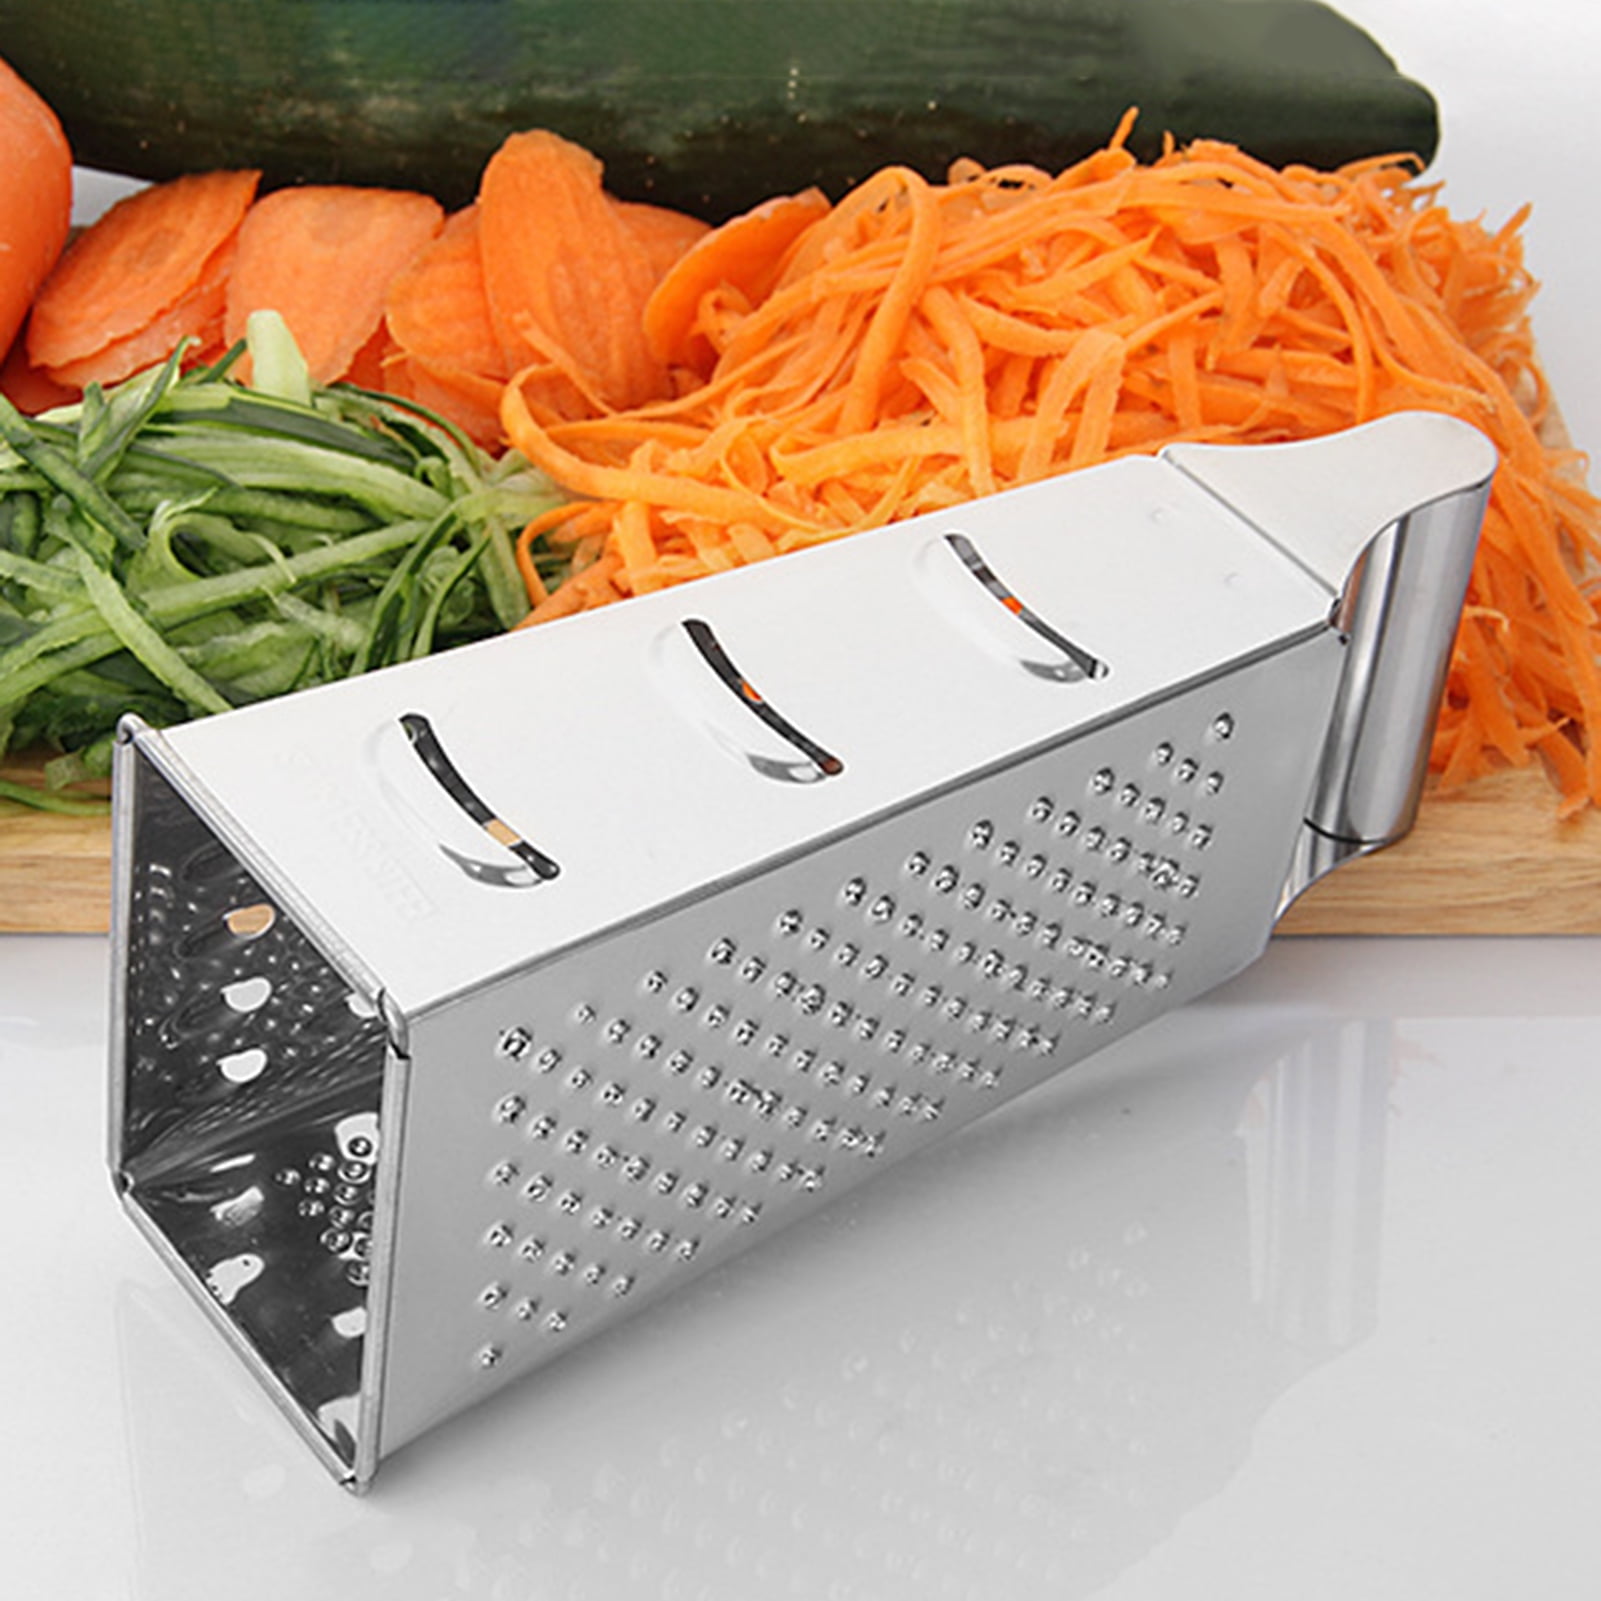 Dropship Large Grater Shaver Stainless Steel Blade With Ergonomic Non-Stick  Handle For Parmesan Cheese, Chocolates, Vegetables Perfect Curl Food  Garnishing Cheese Grater Kitchen Gadget Tool to Sell Online at a Lower  Price